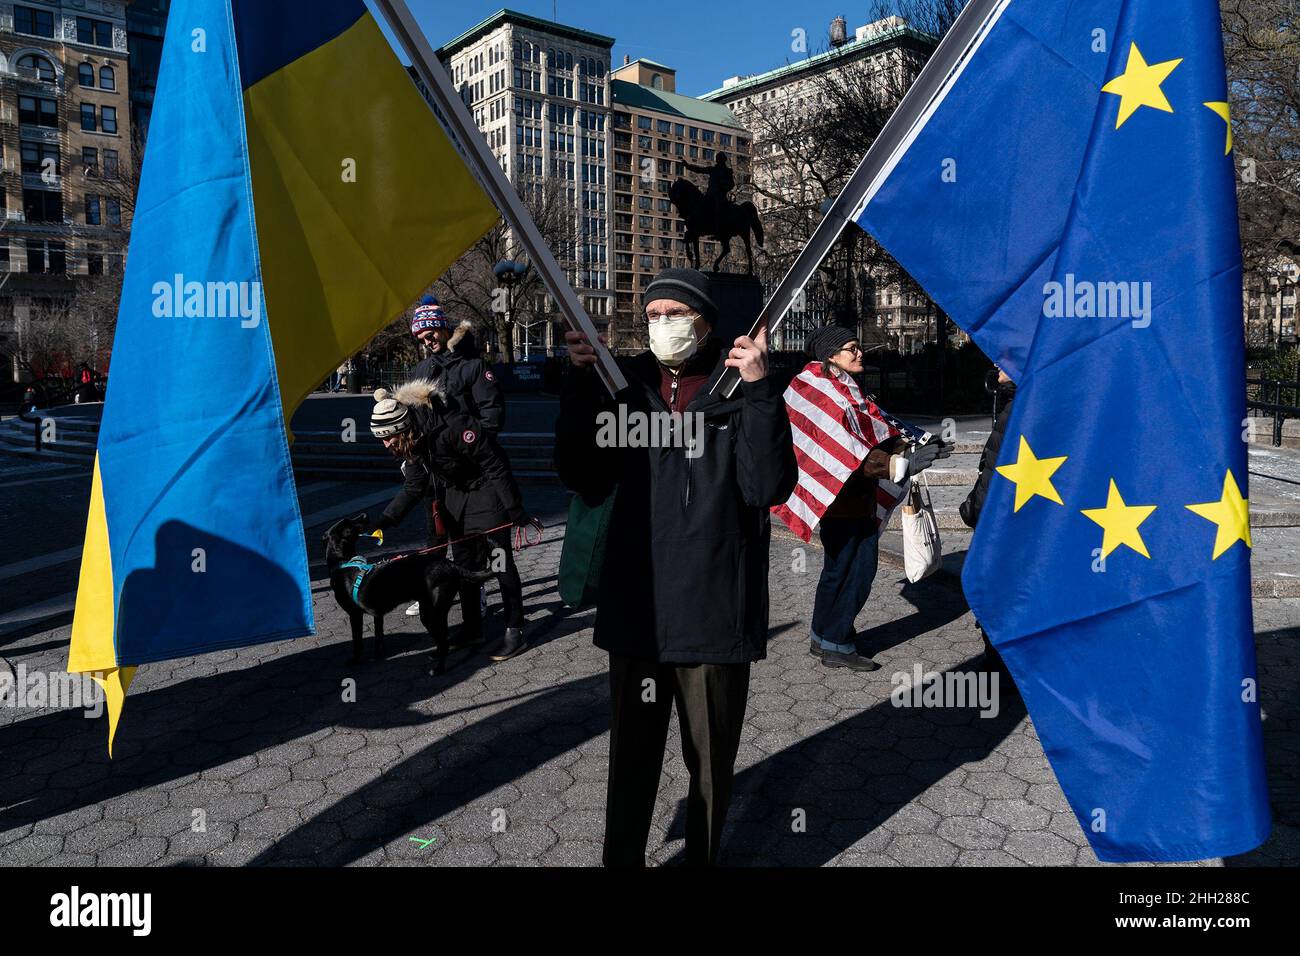 New York, United States. 22nd Jan, 2022. Protester holds Ukrainian and European Union flags during Stand with Ukraine rally against Russian aggression on Union Square. Protesters held posters accusing Russia of crimes against Ukraine. They were also holding flags by Belarus and Georgia, symbolizing Russian interference with those countries. (Photo by Lev Radin/Pacific Press) Credit: Pacific Press Media Production Corp./Alamy Live News Stock Photo